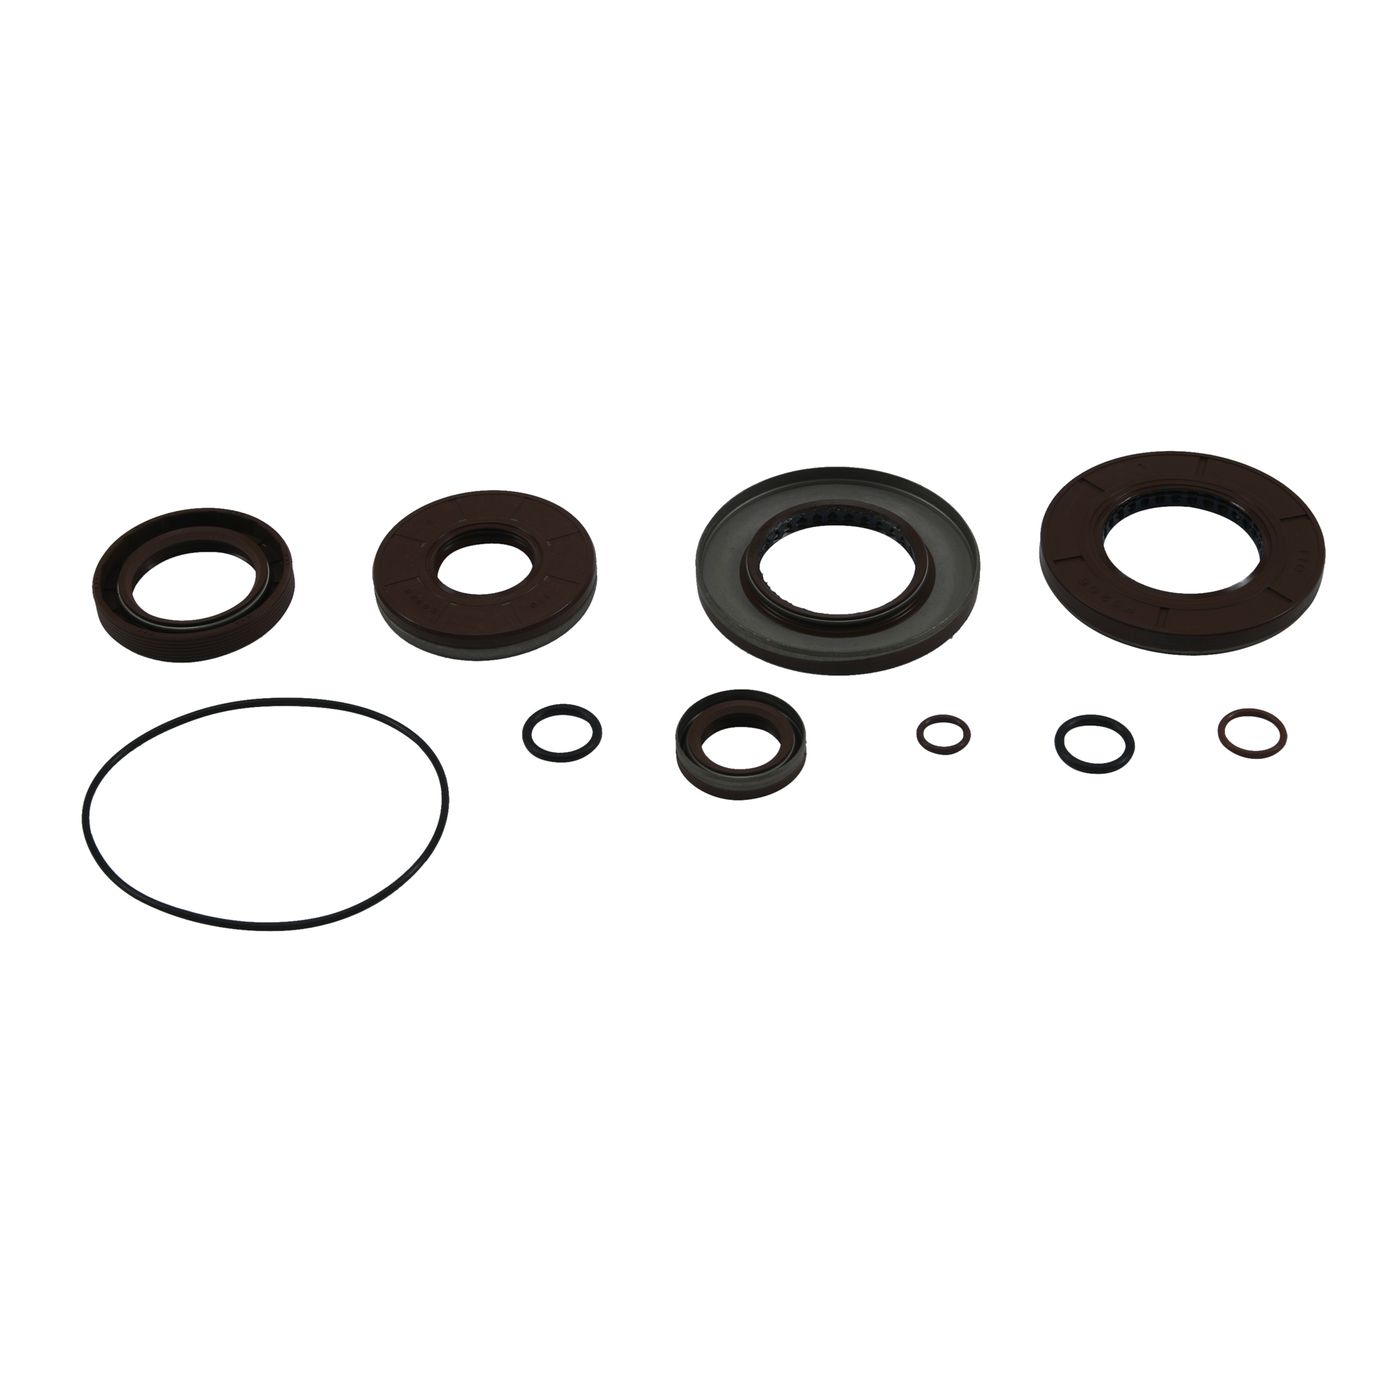 Wrp Diff Seal Kits - WRP252130-5 image